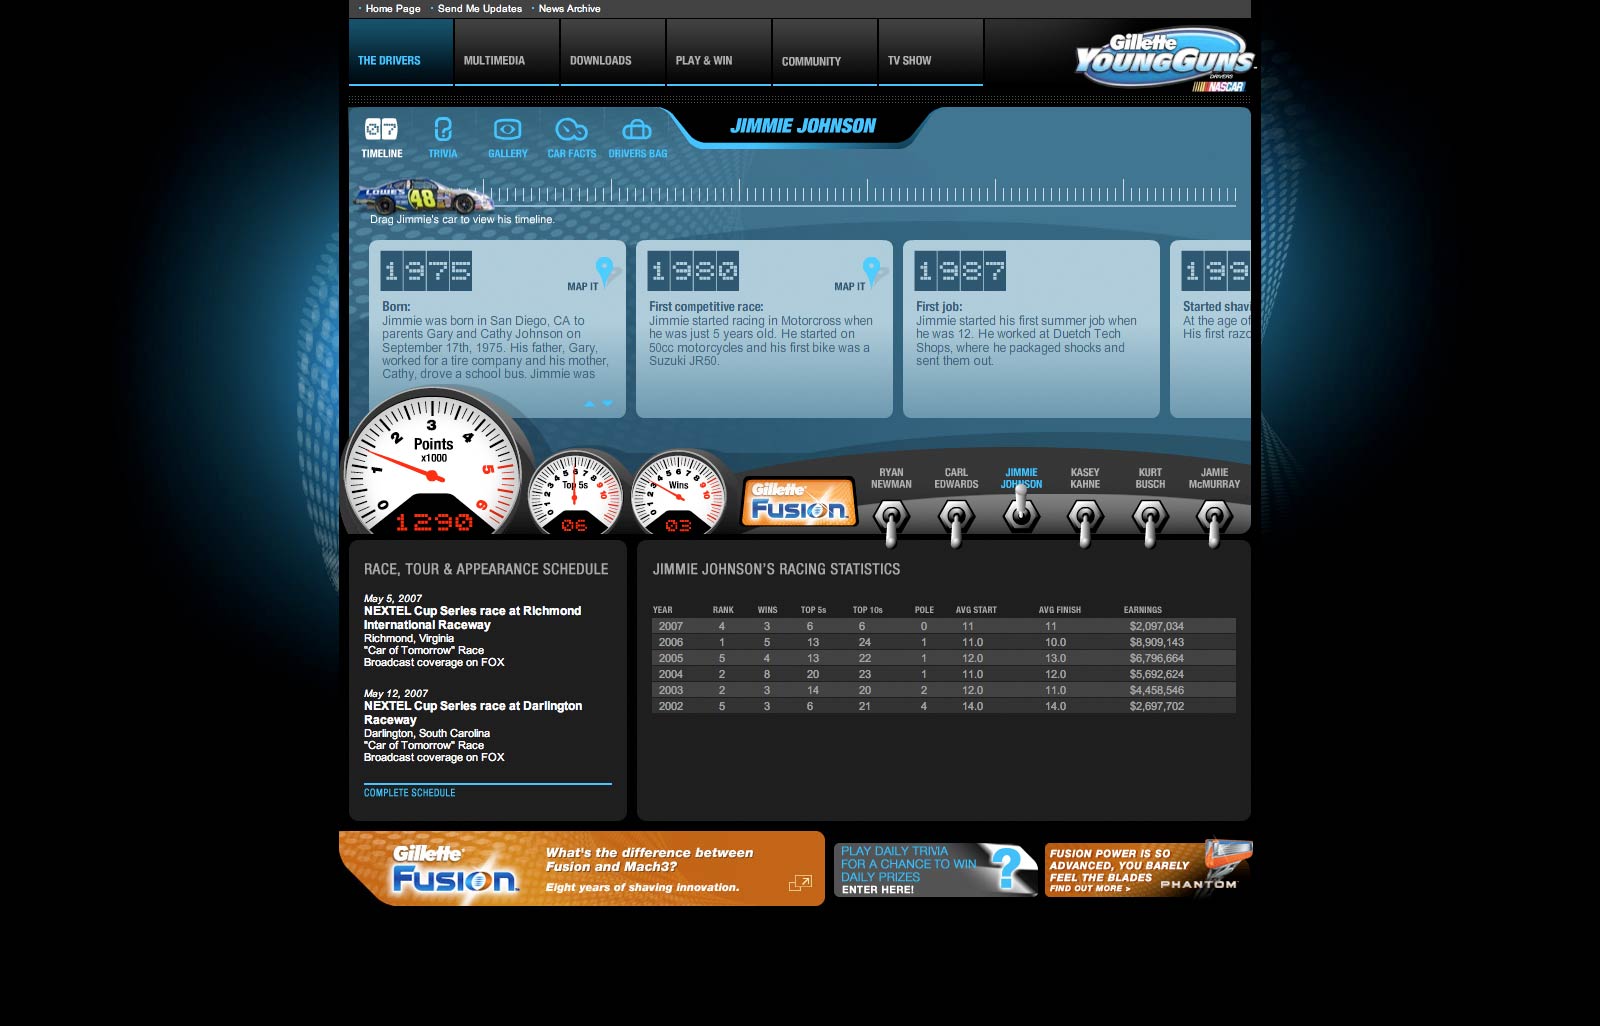 Gillette Young Guns microsite driver detail page with timeline